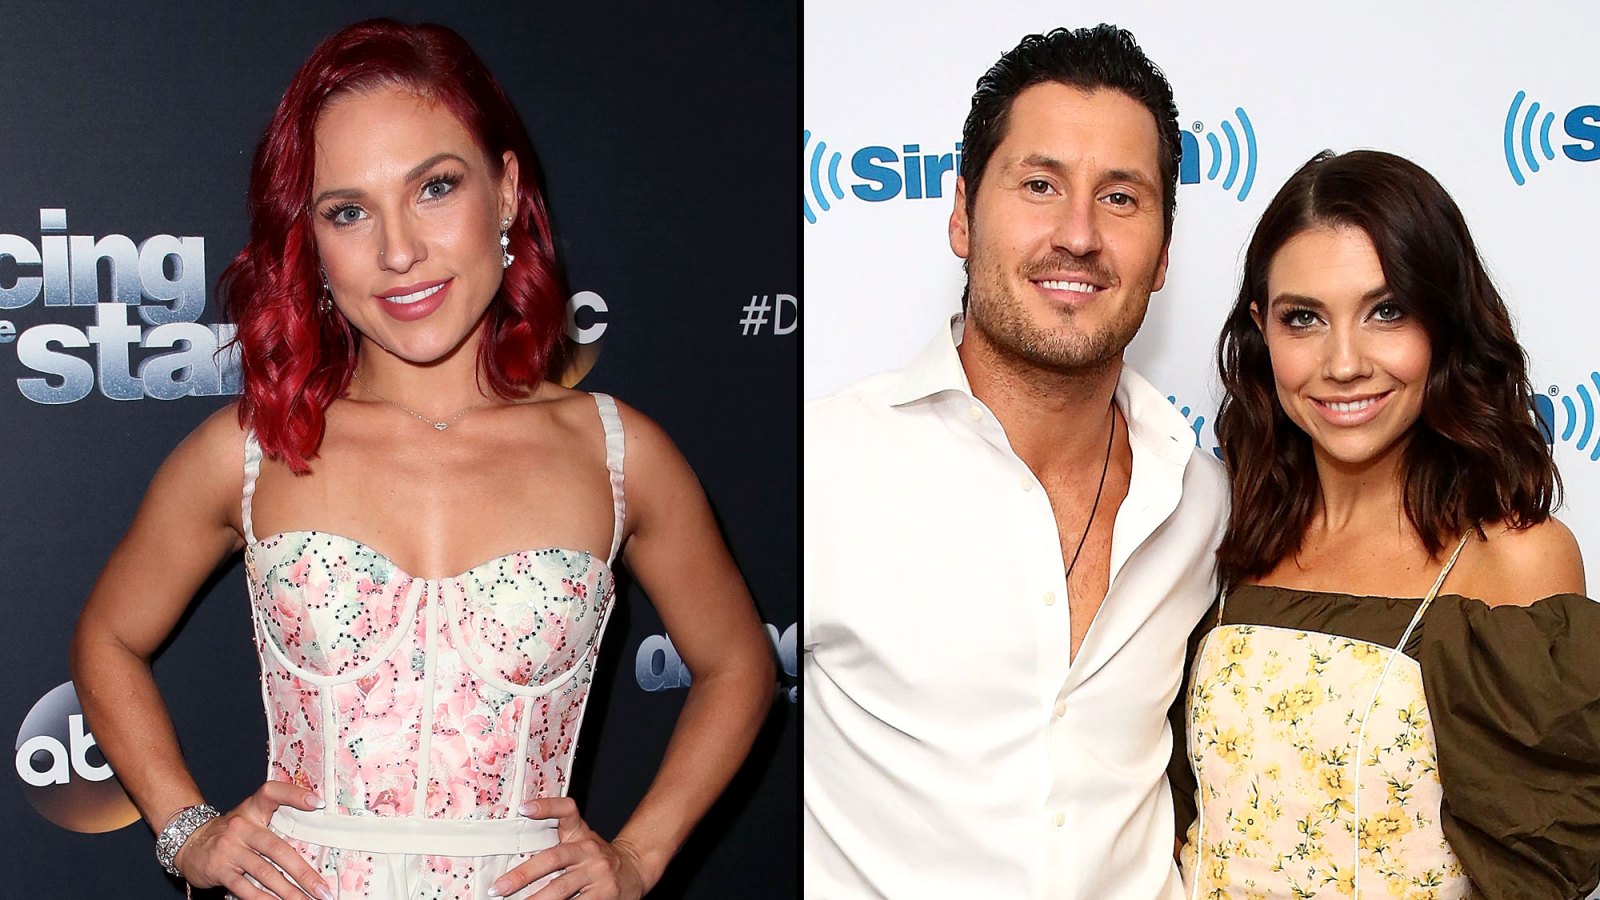 Dancing-With-the-Stars-Sharna-Burgess--Val-Chmerkovisky-and-Jenna-Johnsons-Wedding-Will-Be-One-for-the-Books